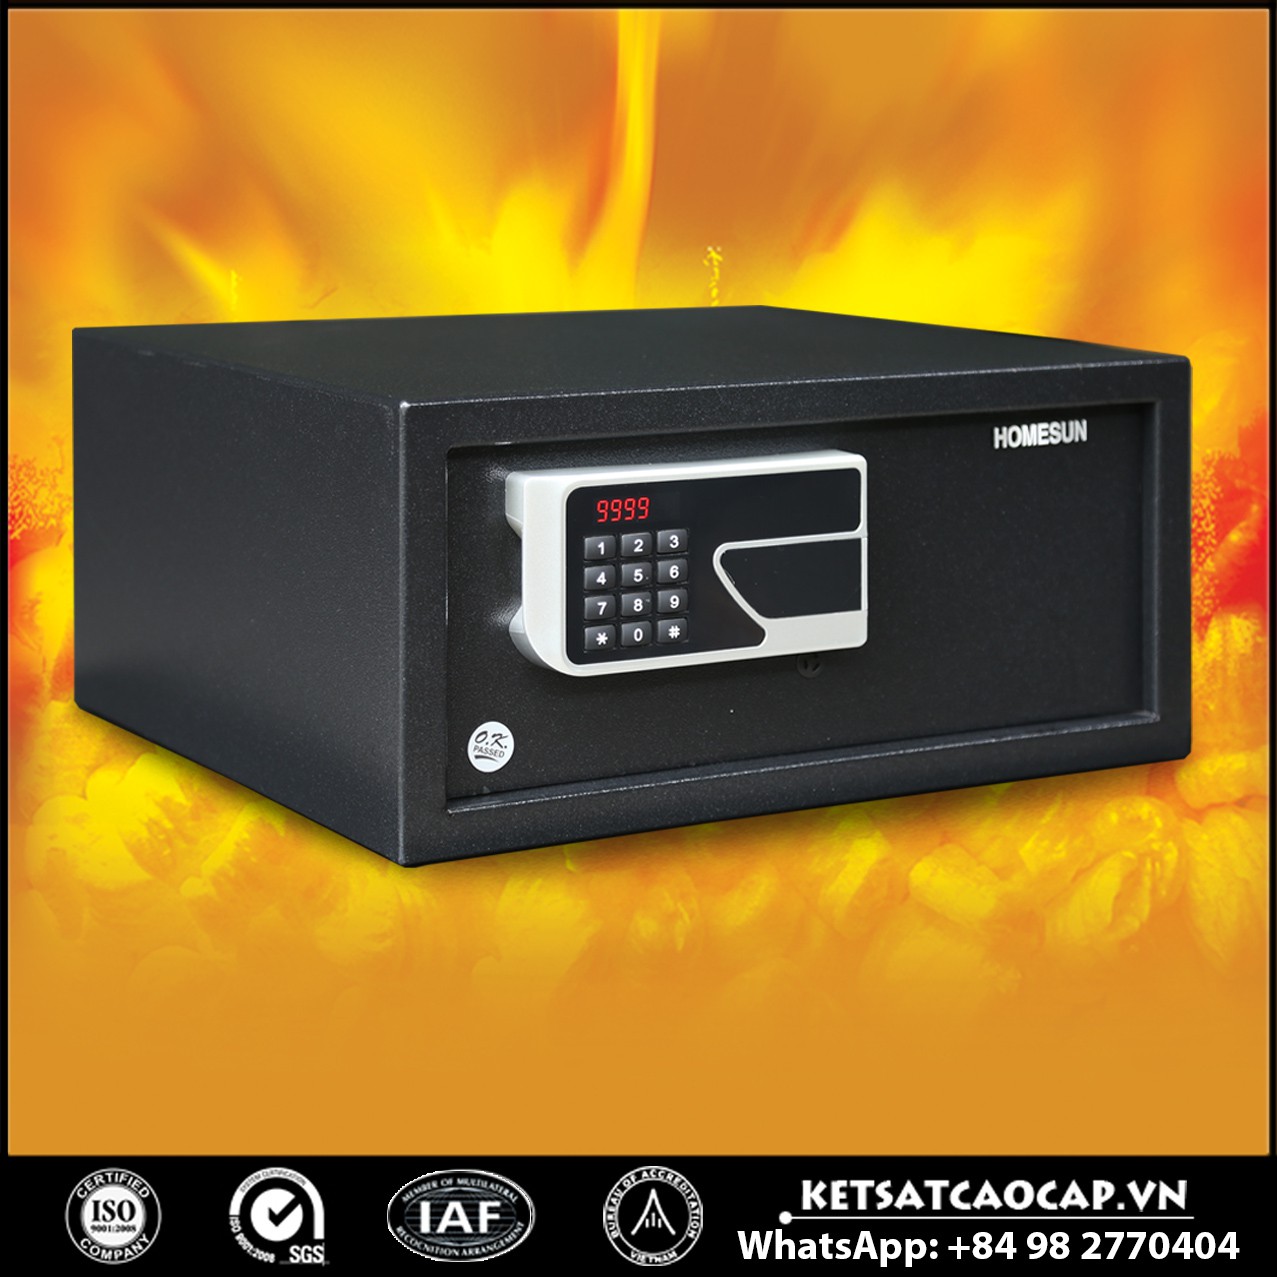 Best Sellers In Hotel Safes Manufacturers for Sale